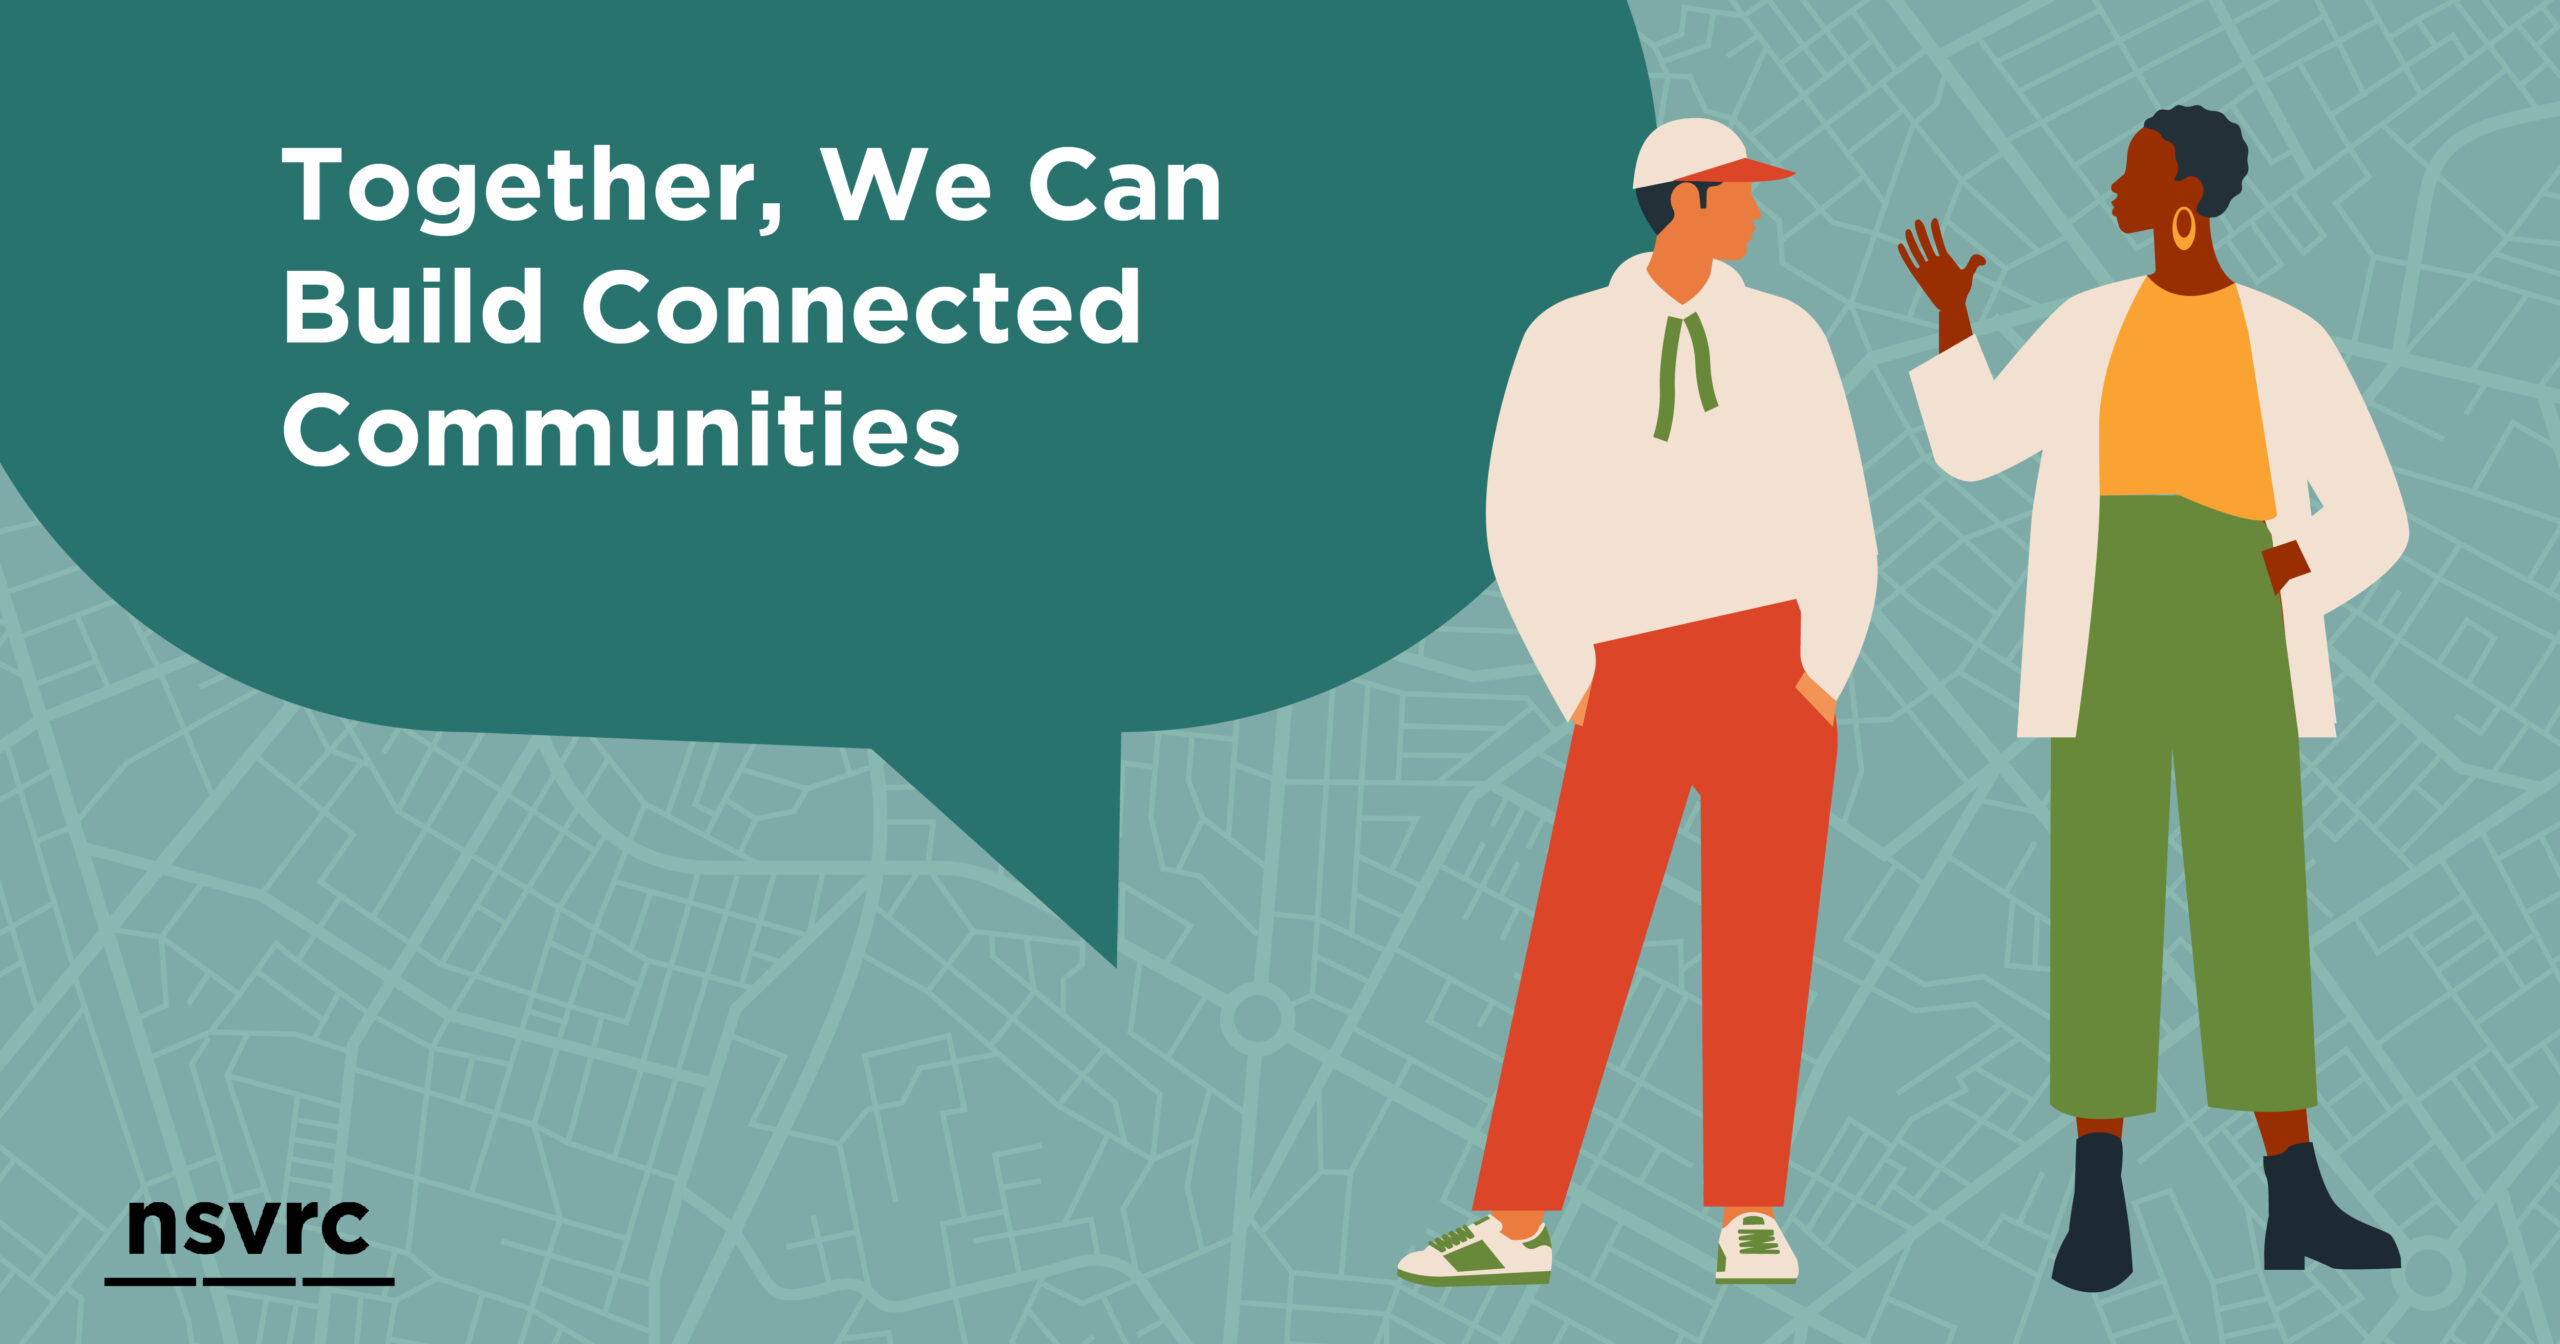 Building Connected Communities is Center Stage for Violence Prevention